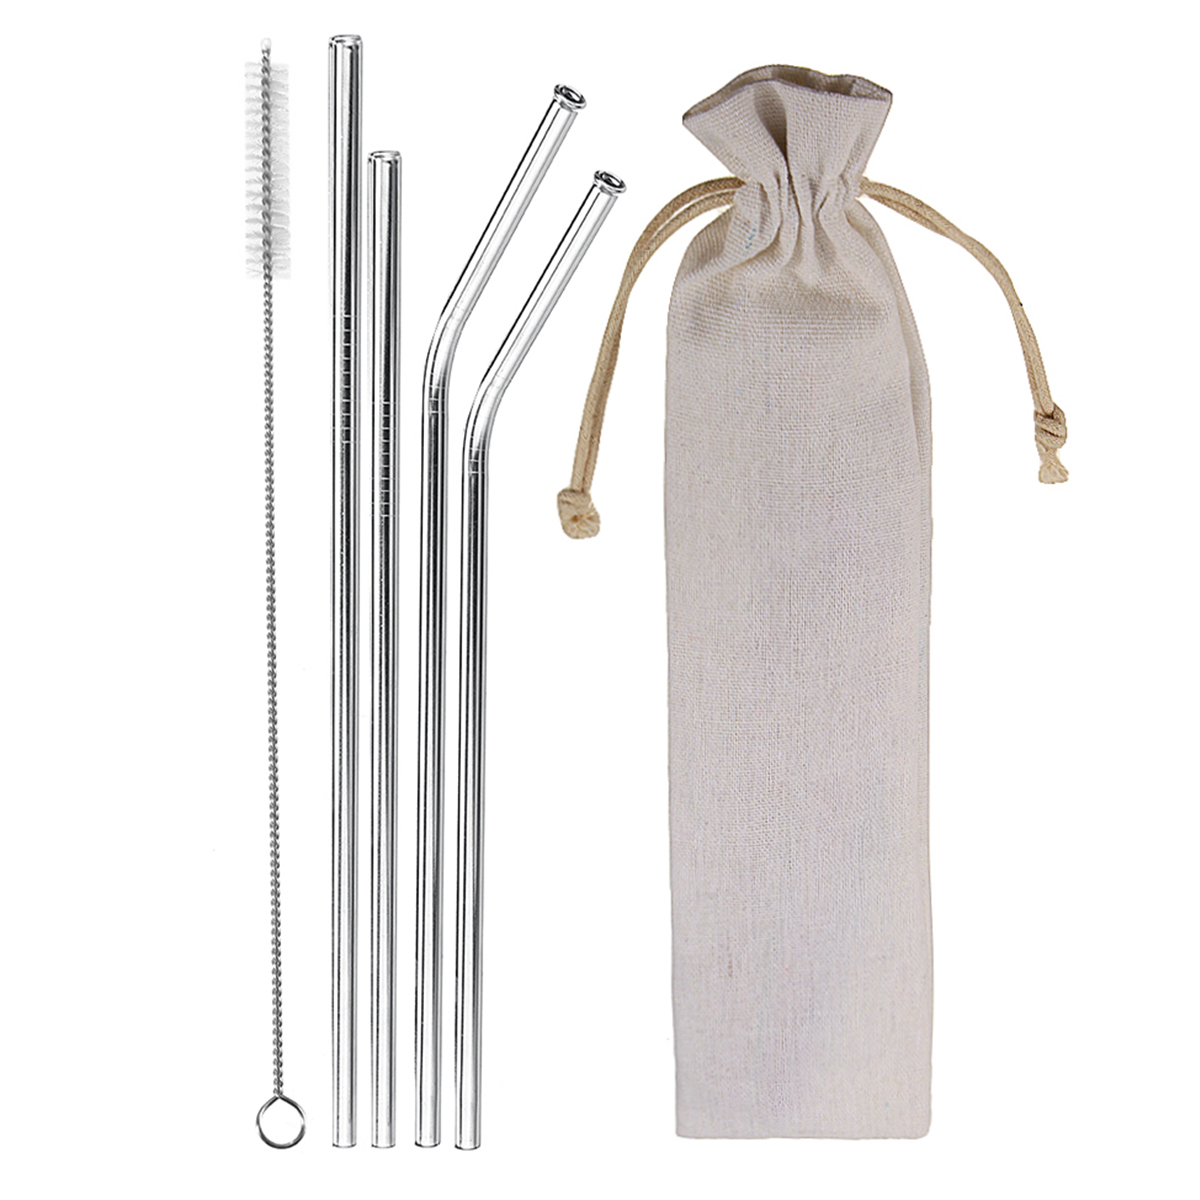 

Stainless Steel Metal Drinking Straw Reusable Bar Cocktail Stirrer Eco Friendly Straws Set With Brush